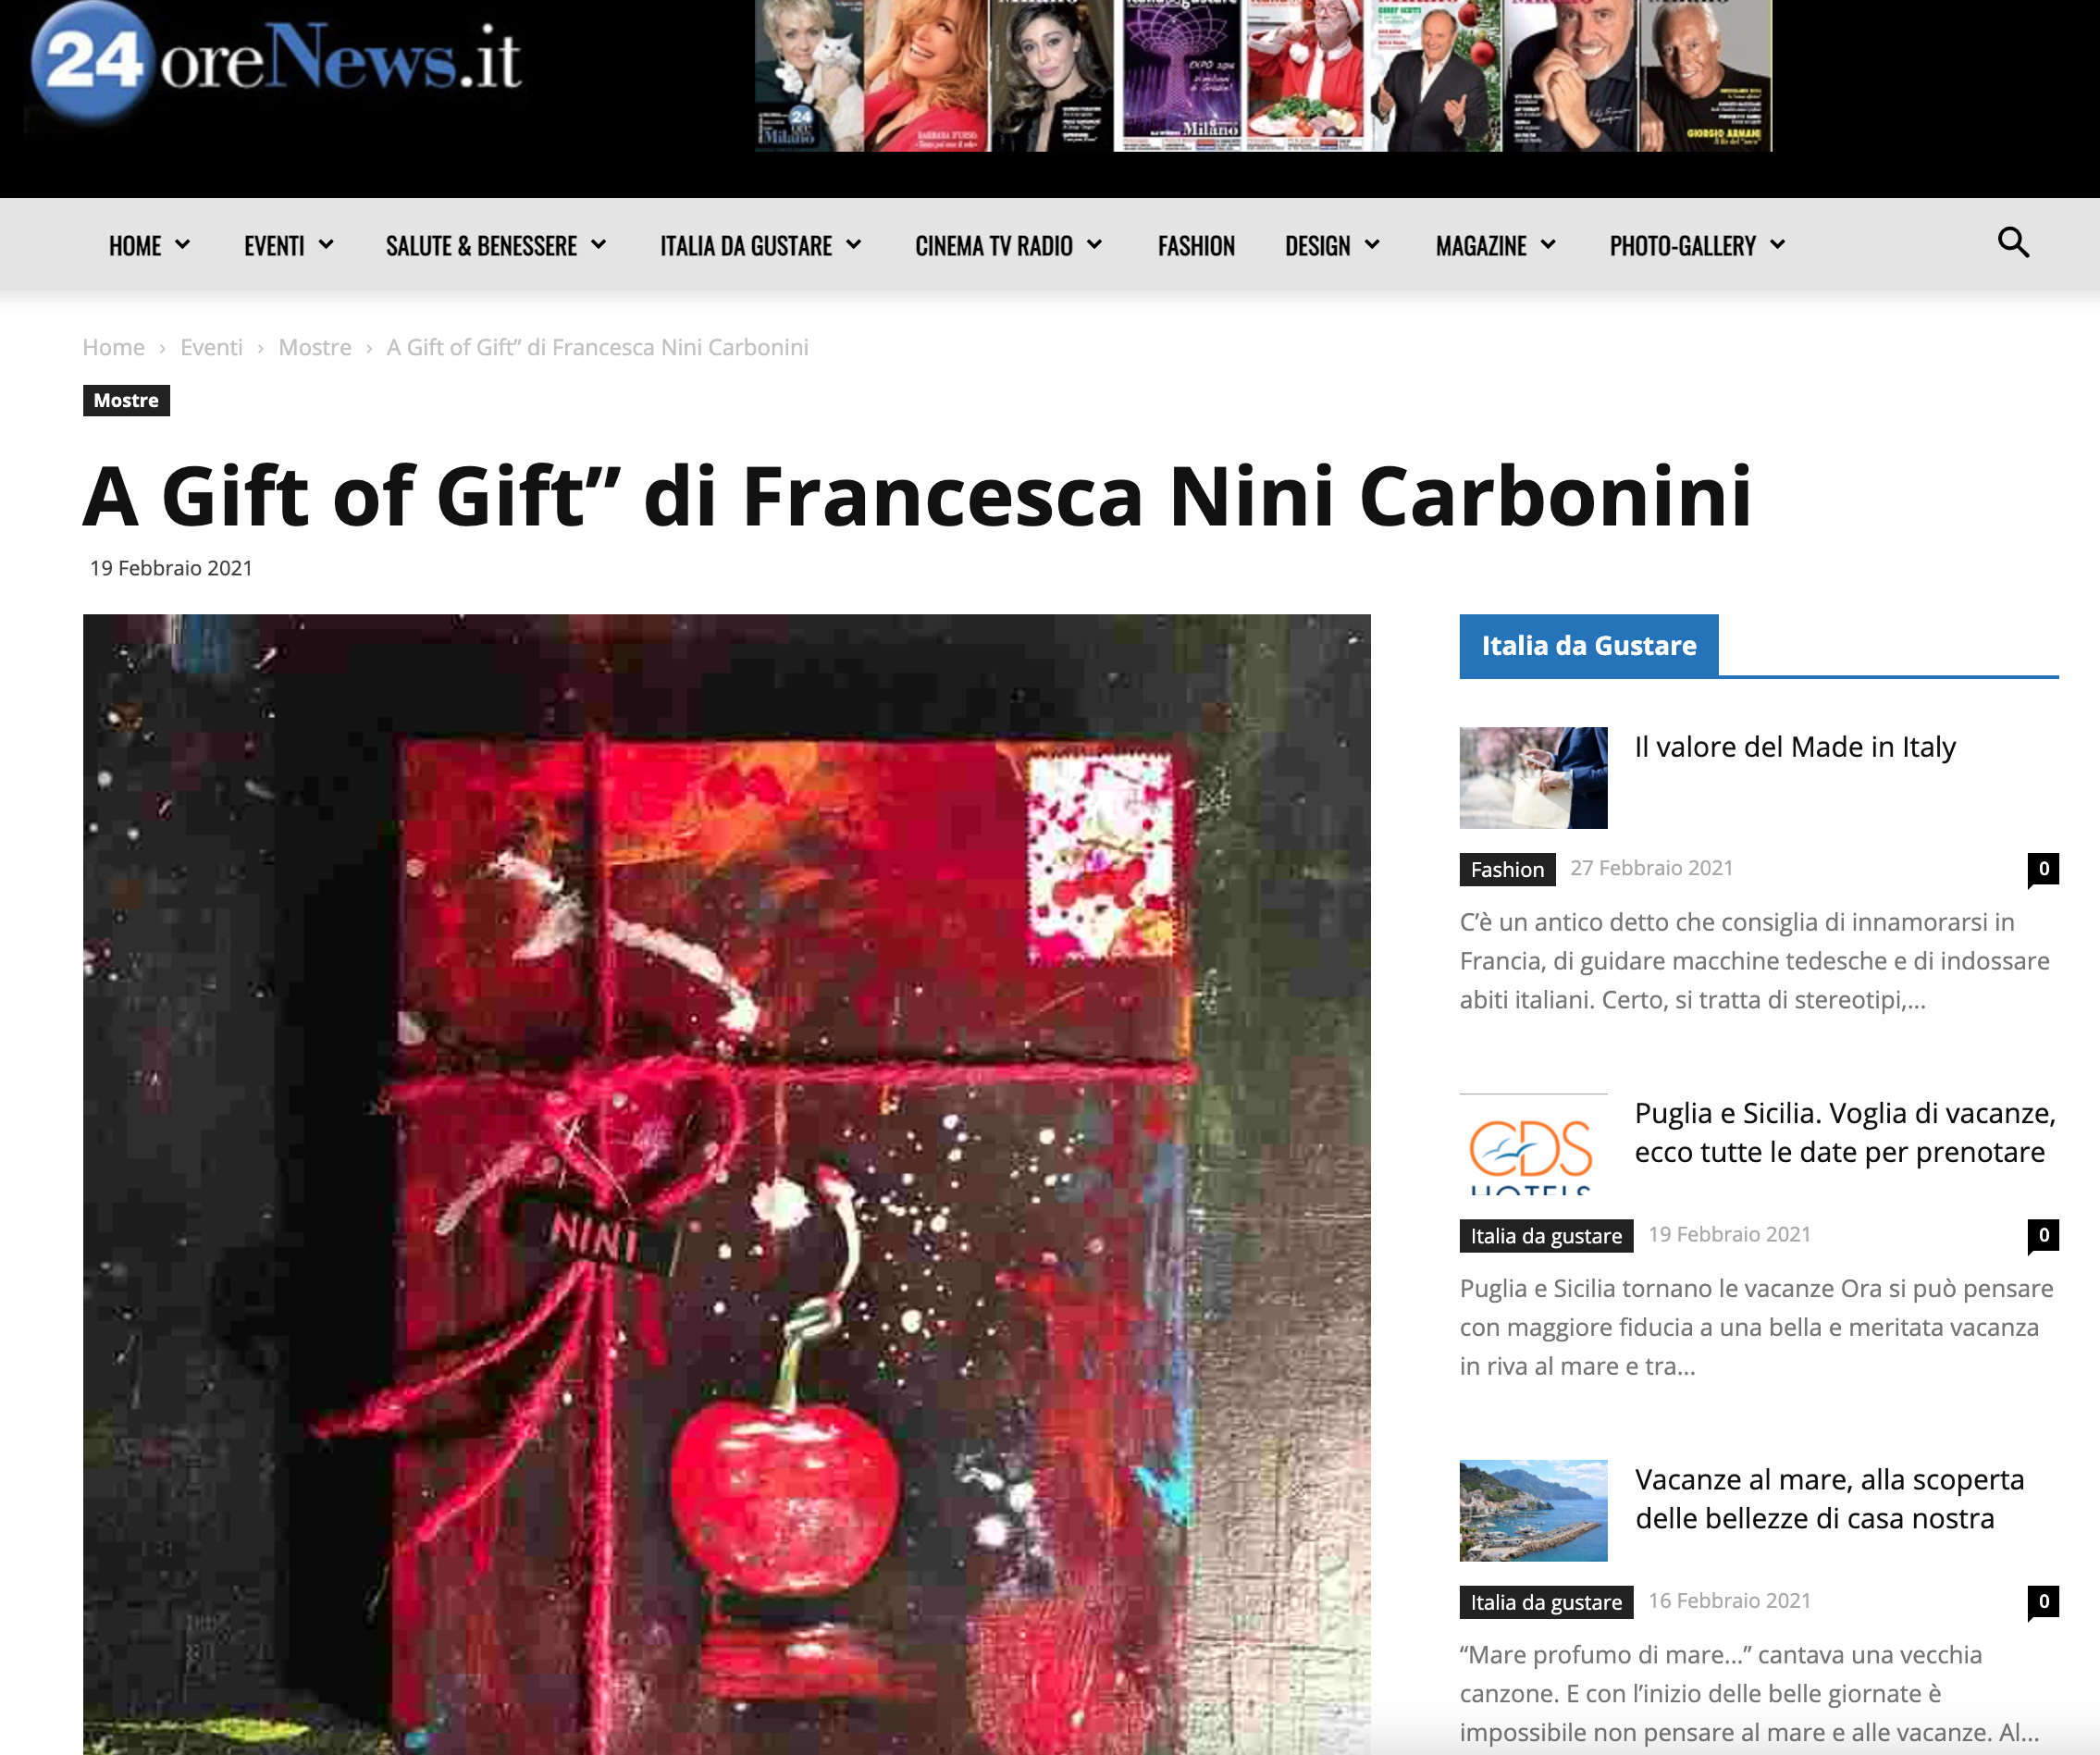 NINI: SERIE “A GIFT OF GIFT” SULLE TESTATE ONLINE